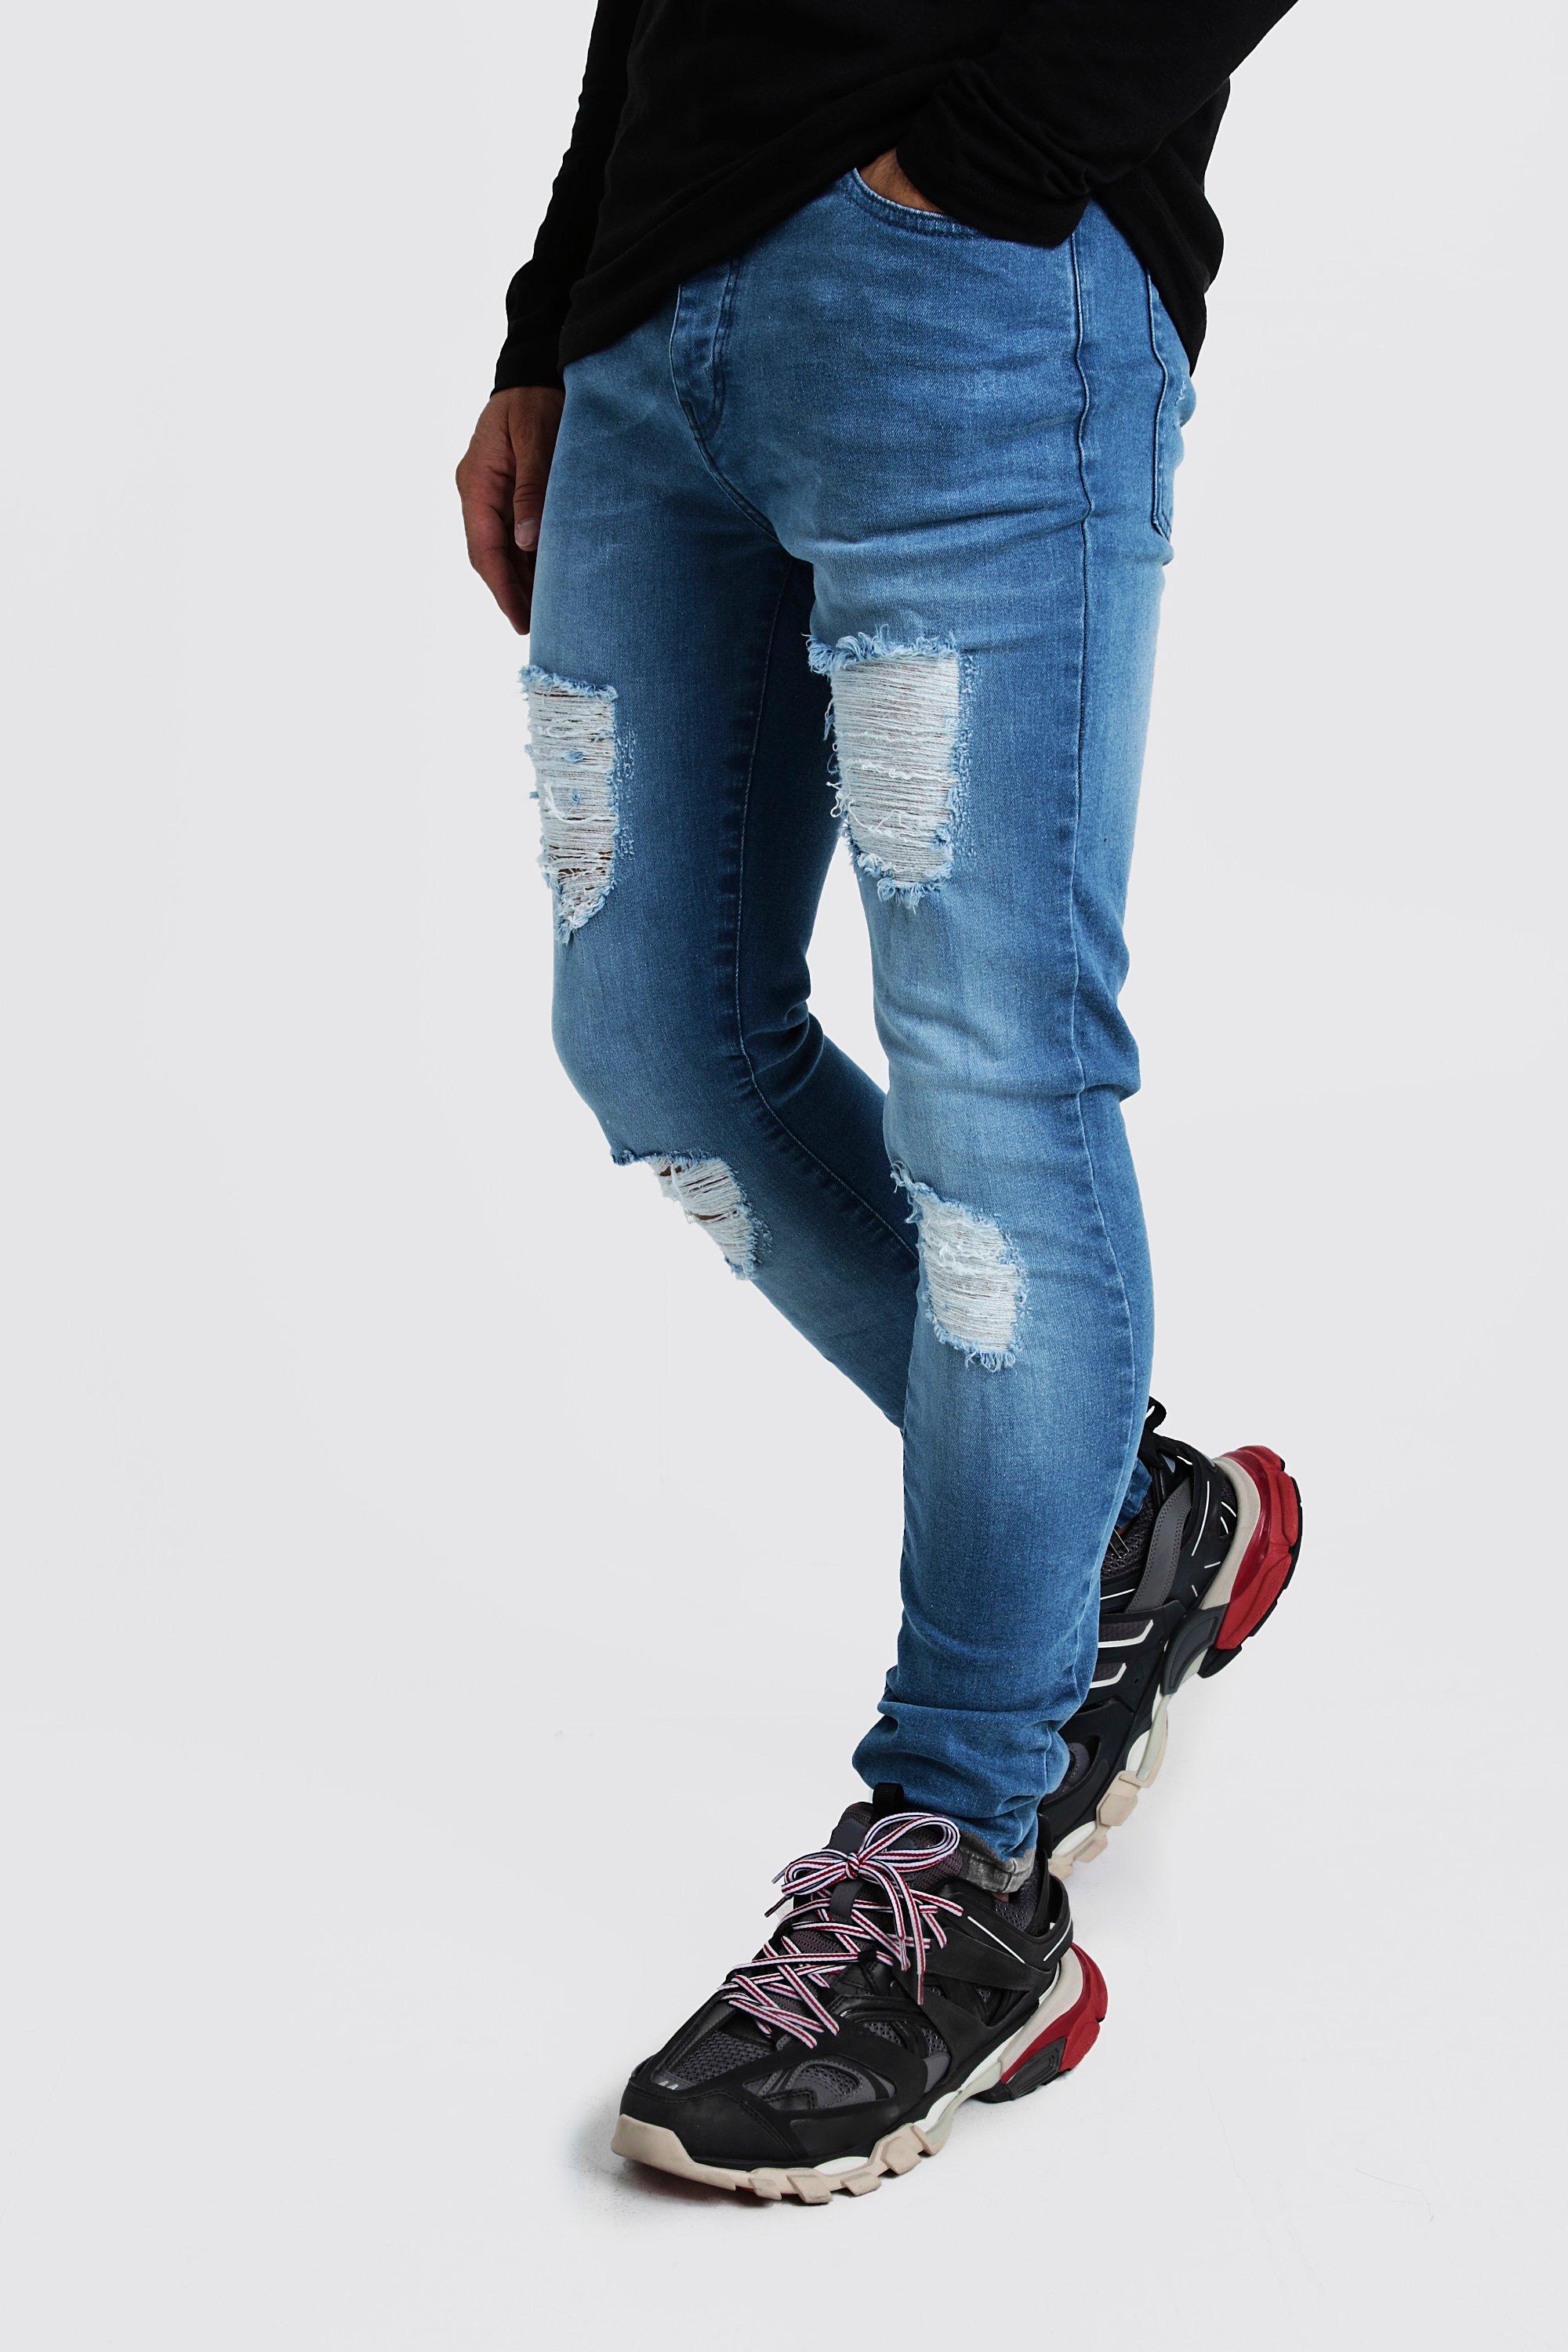 Super Skinny Jeans With Distressed Knees - boohooMAN